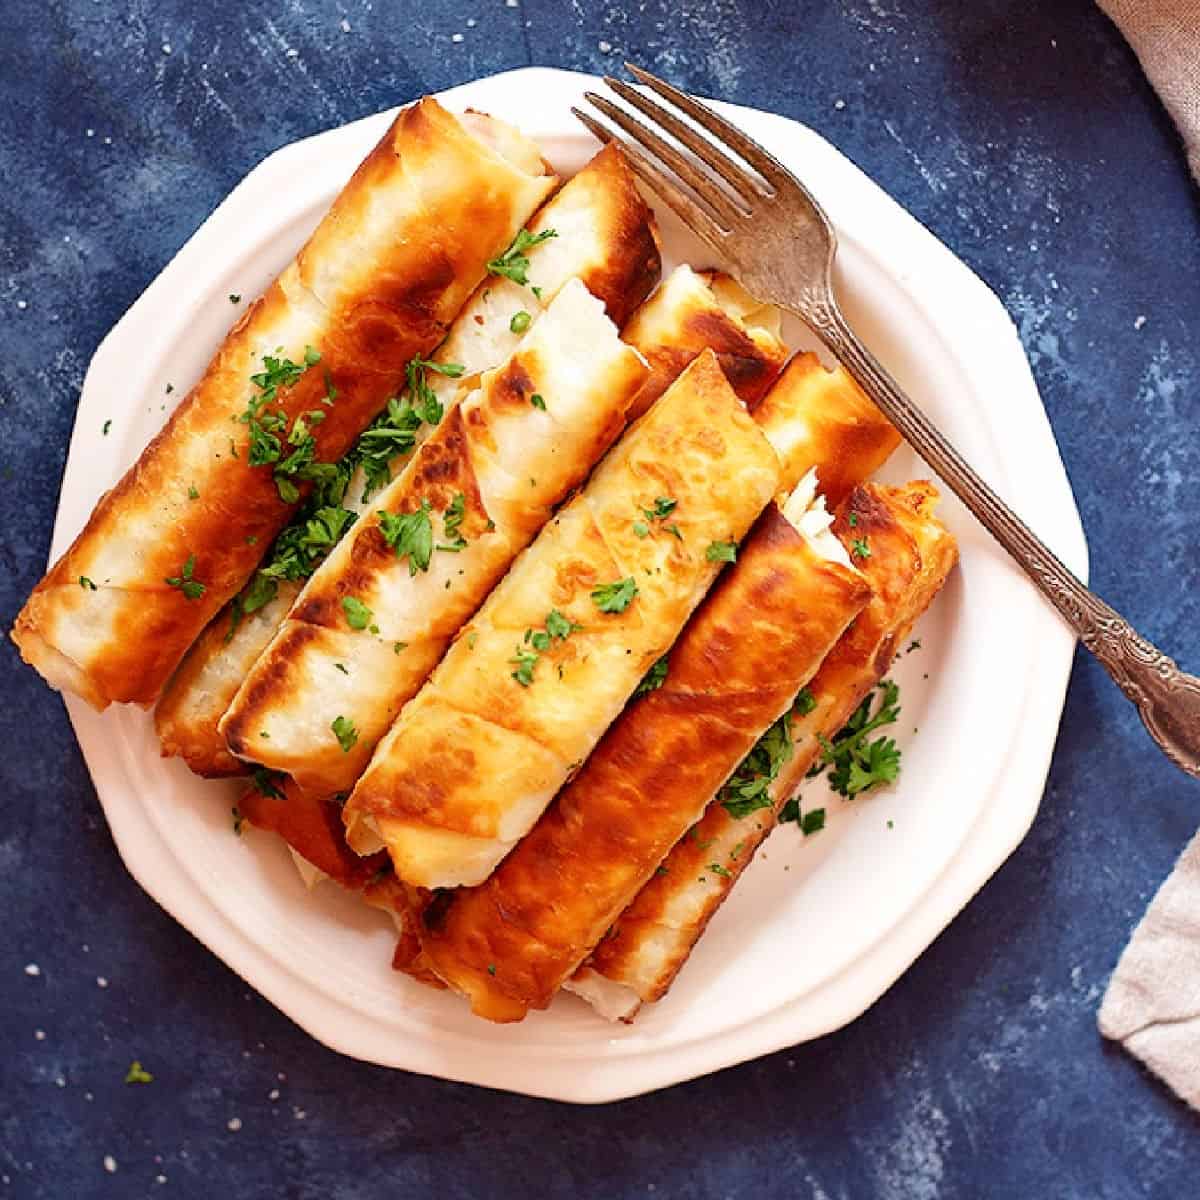 https://www.unicornsinthekitchen.com/wp-admin/post.php?post=41181&action=edit#:~:text=Borek%20is%20a%20Turkish%20savory%20crunchy%20pastry%20filled%20with%20different%20fillings%20such%20as%20cheese%20or%20potatoes.%20Learn%20how%20to%20make%20Turkish%20borek%20recipe%20by%20watching%20our%20step%2Dby%2Dstep%20video%20and%20tutorial.%20They%20are%20perfect%20as%20a%20midday%20snack%20or%20for%20breakfast%20and%20you%20can%20make%20them%20in%20advance%20and%20freeze%20them%20for%20later.%C2%A0